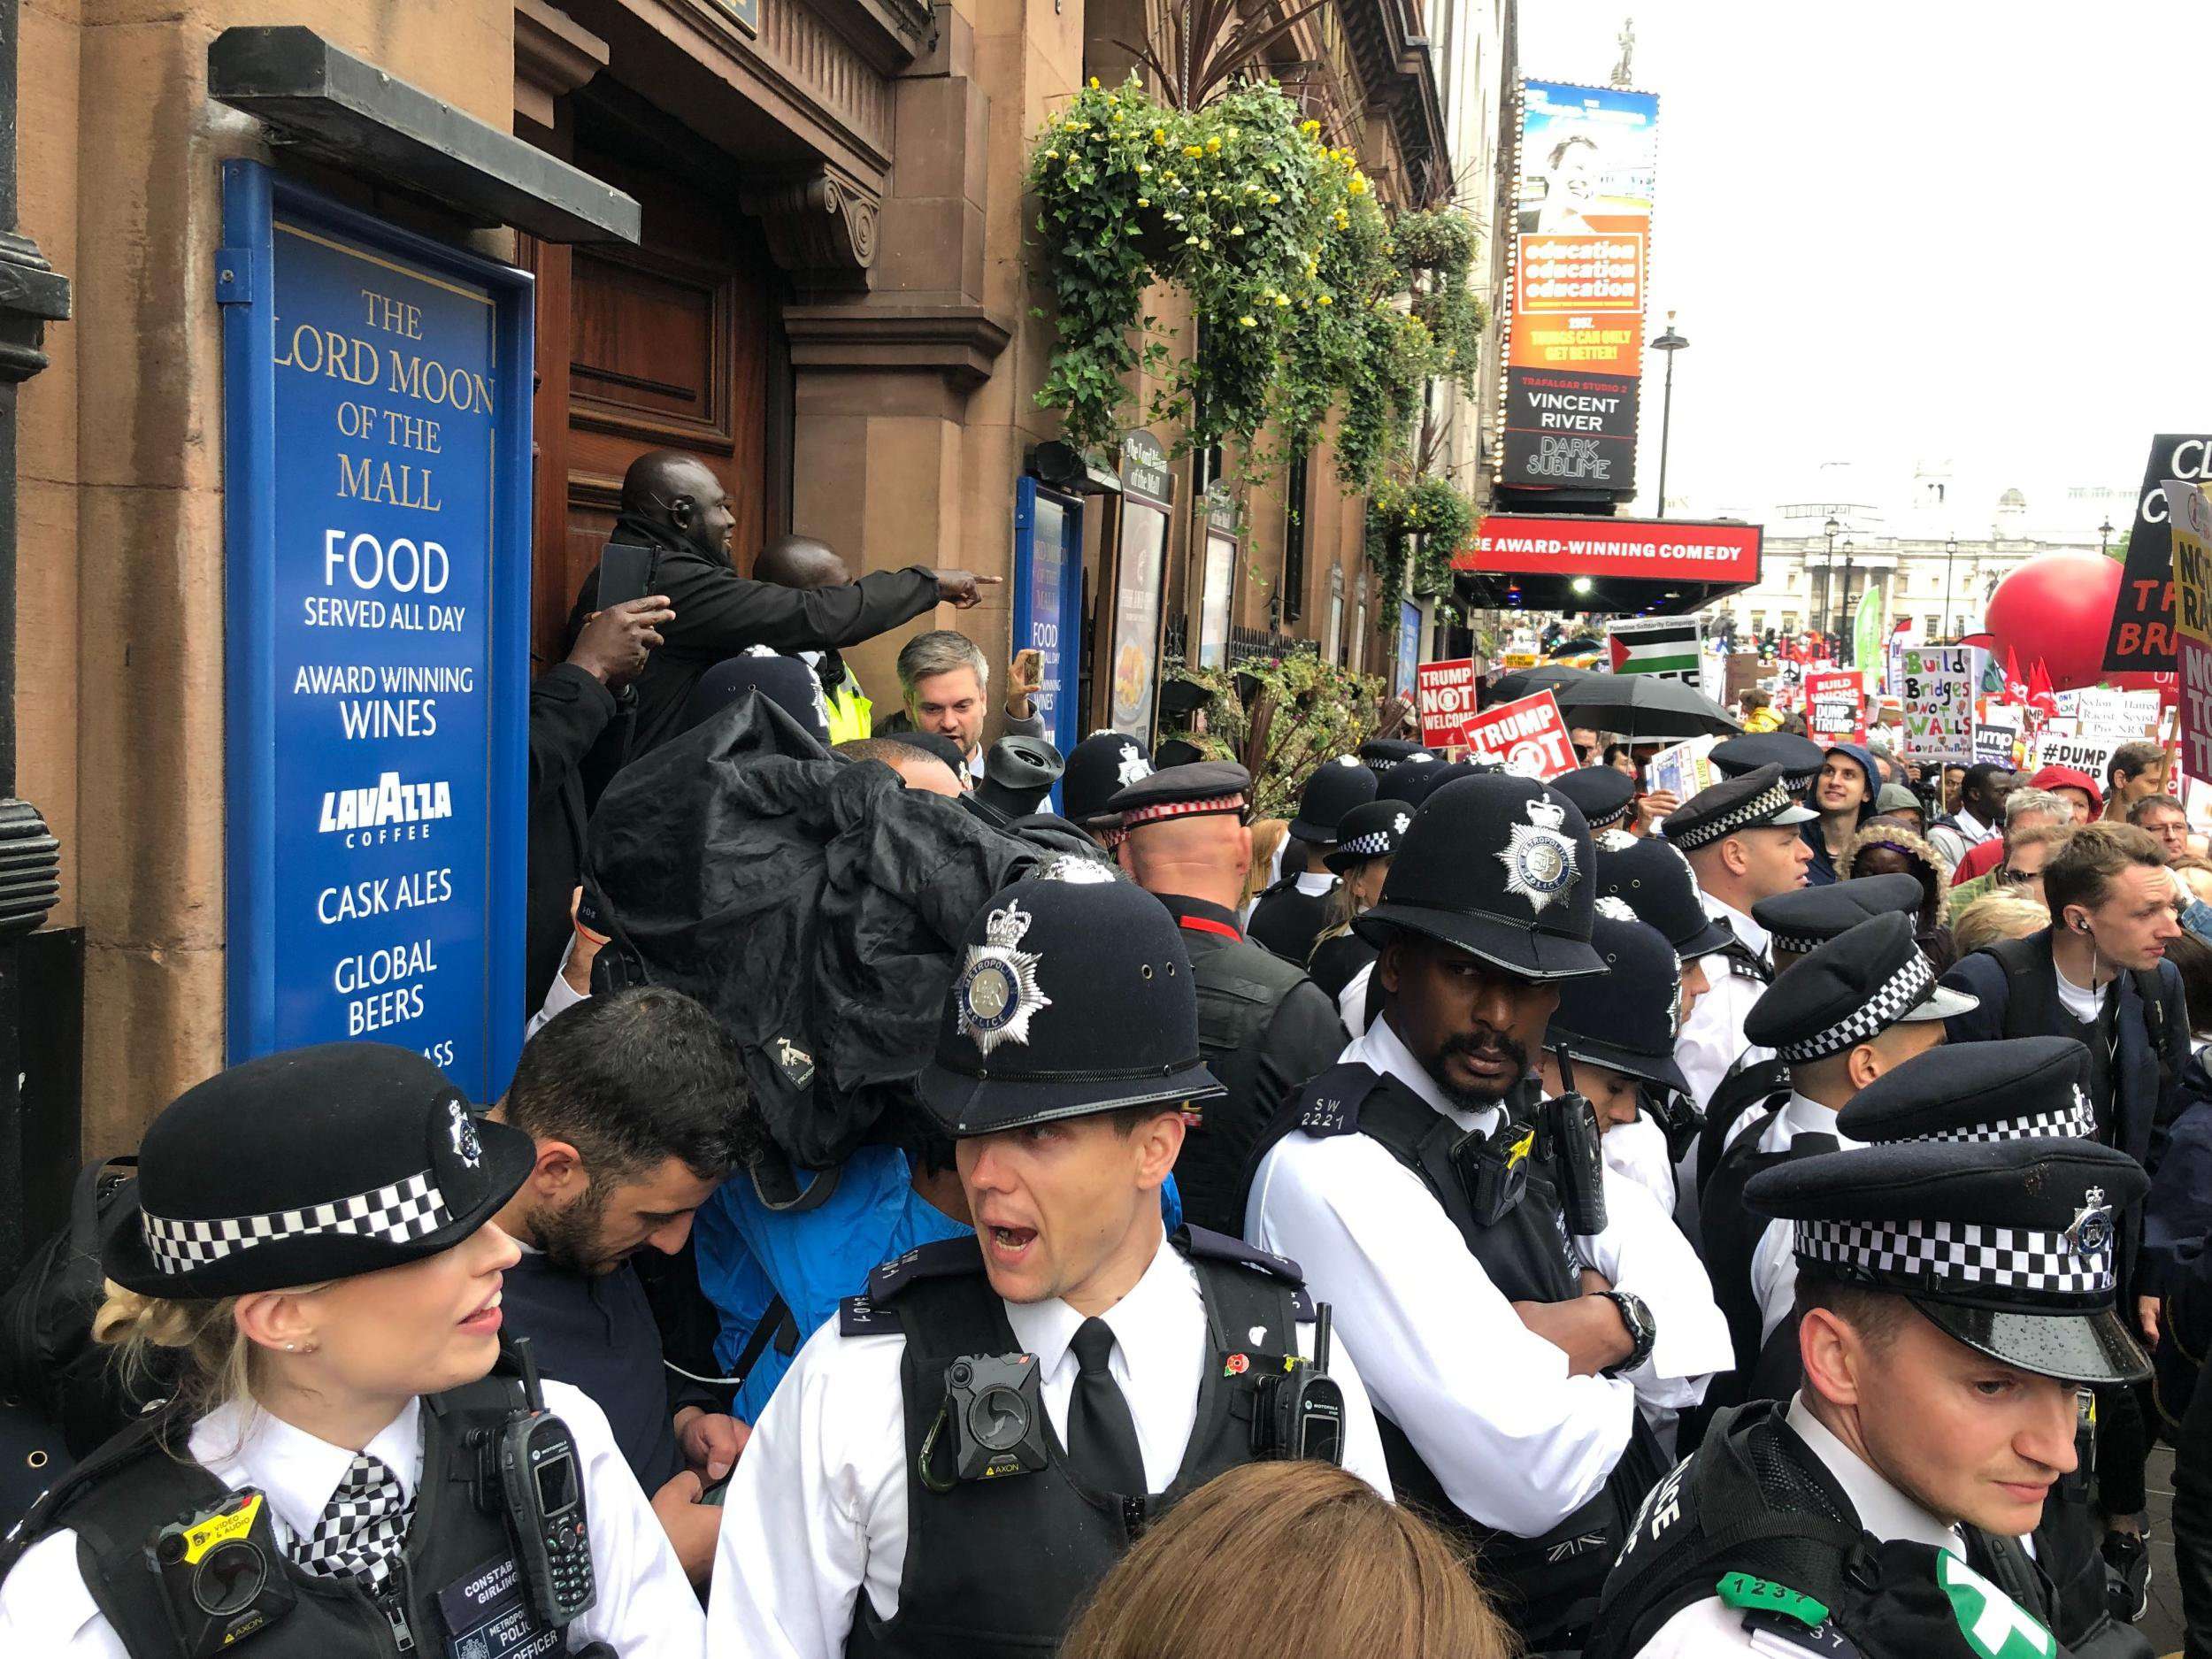 image for Trump supporters barricaded in Wetherspoons by police as protesters chant ‘Nazi scum off our streets’